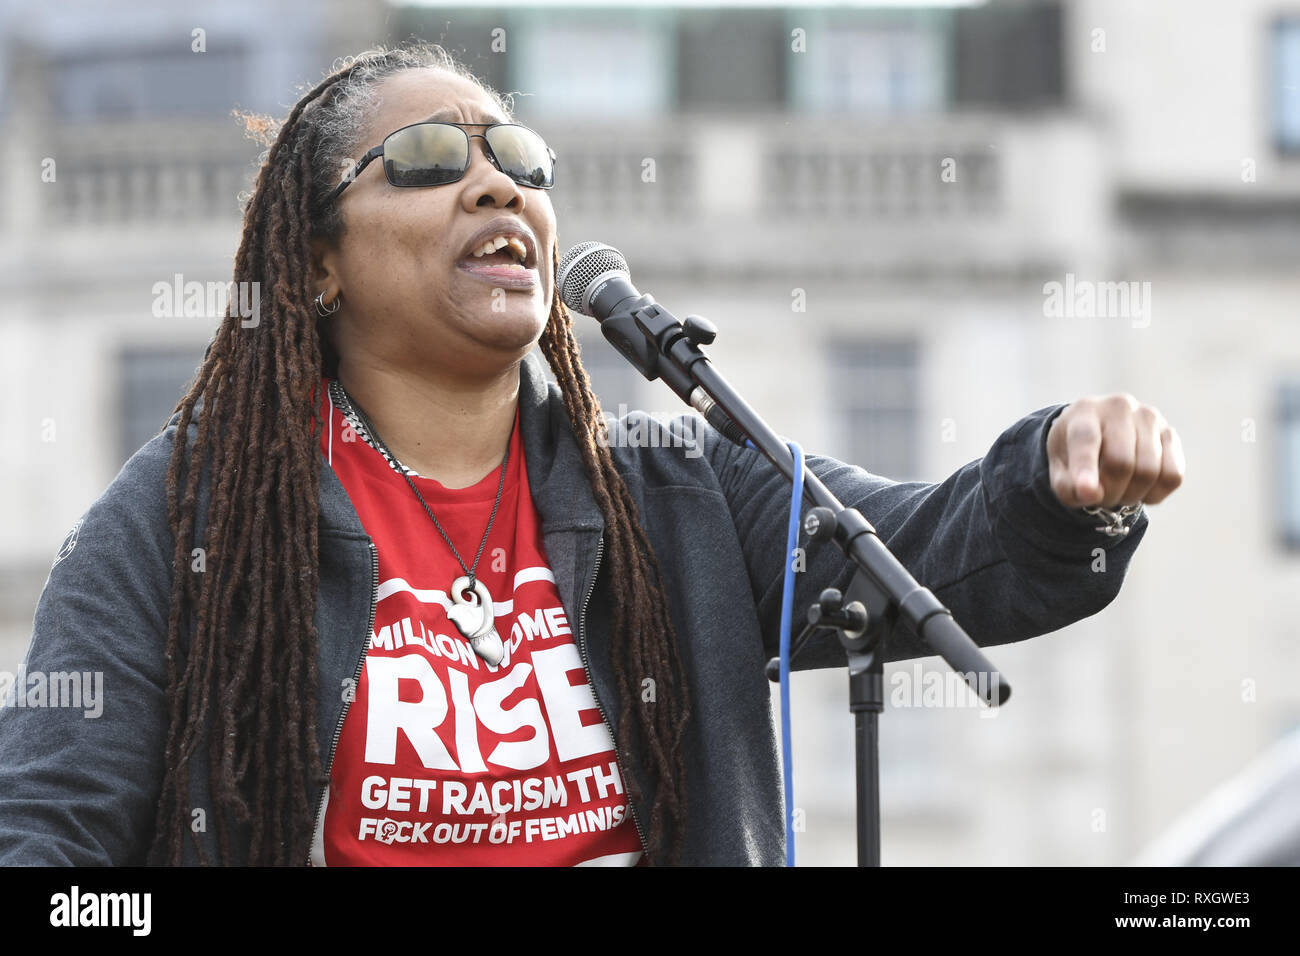 London, Greater London, UK. 9th Mar, 2019. Speaker gave a passionate speech to protesters at the Million women's rise rally in London.Thousands of women marched through central London to a rally in Trafalgar Square in London demanding freedom and justice and the end of male violence against them. ''˜Never Forgotten' was the theme for this year's march and participants commemorated the lives of girls and women who have been killed by mens's violence. Credit: Andres Pantoja/SOPA Images/ZUMA Wire/Alamy Live News Stock Photo